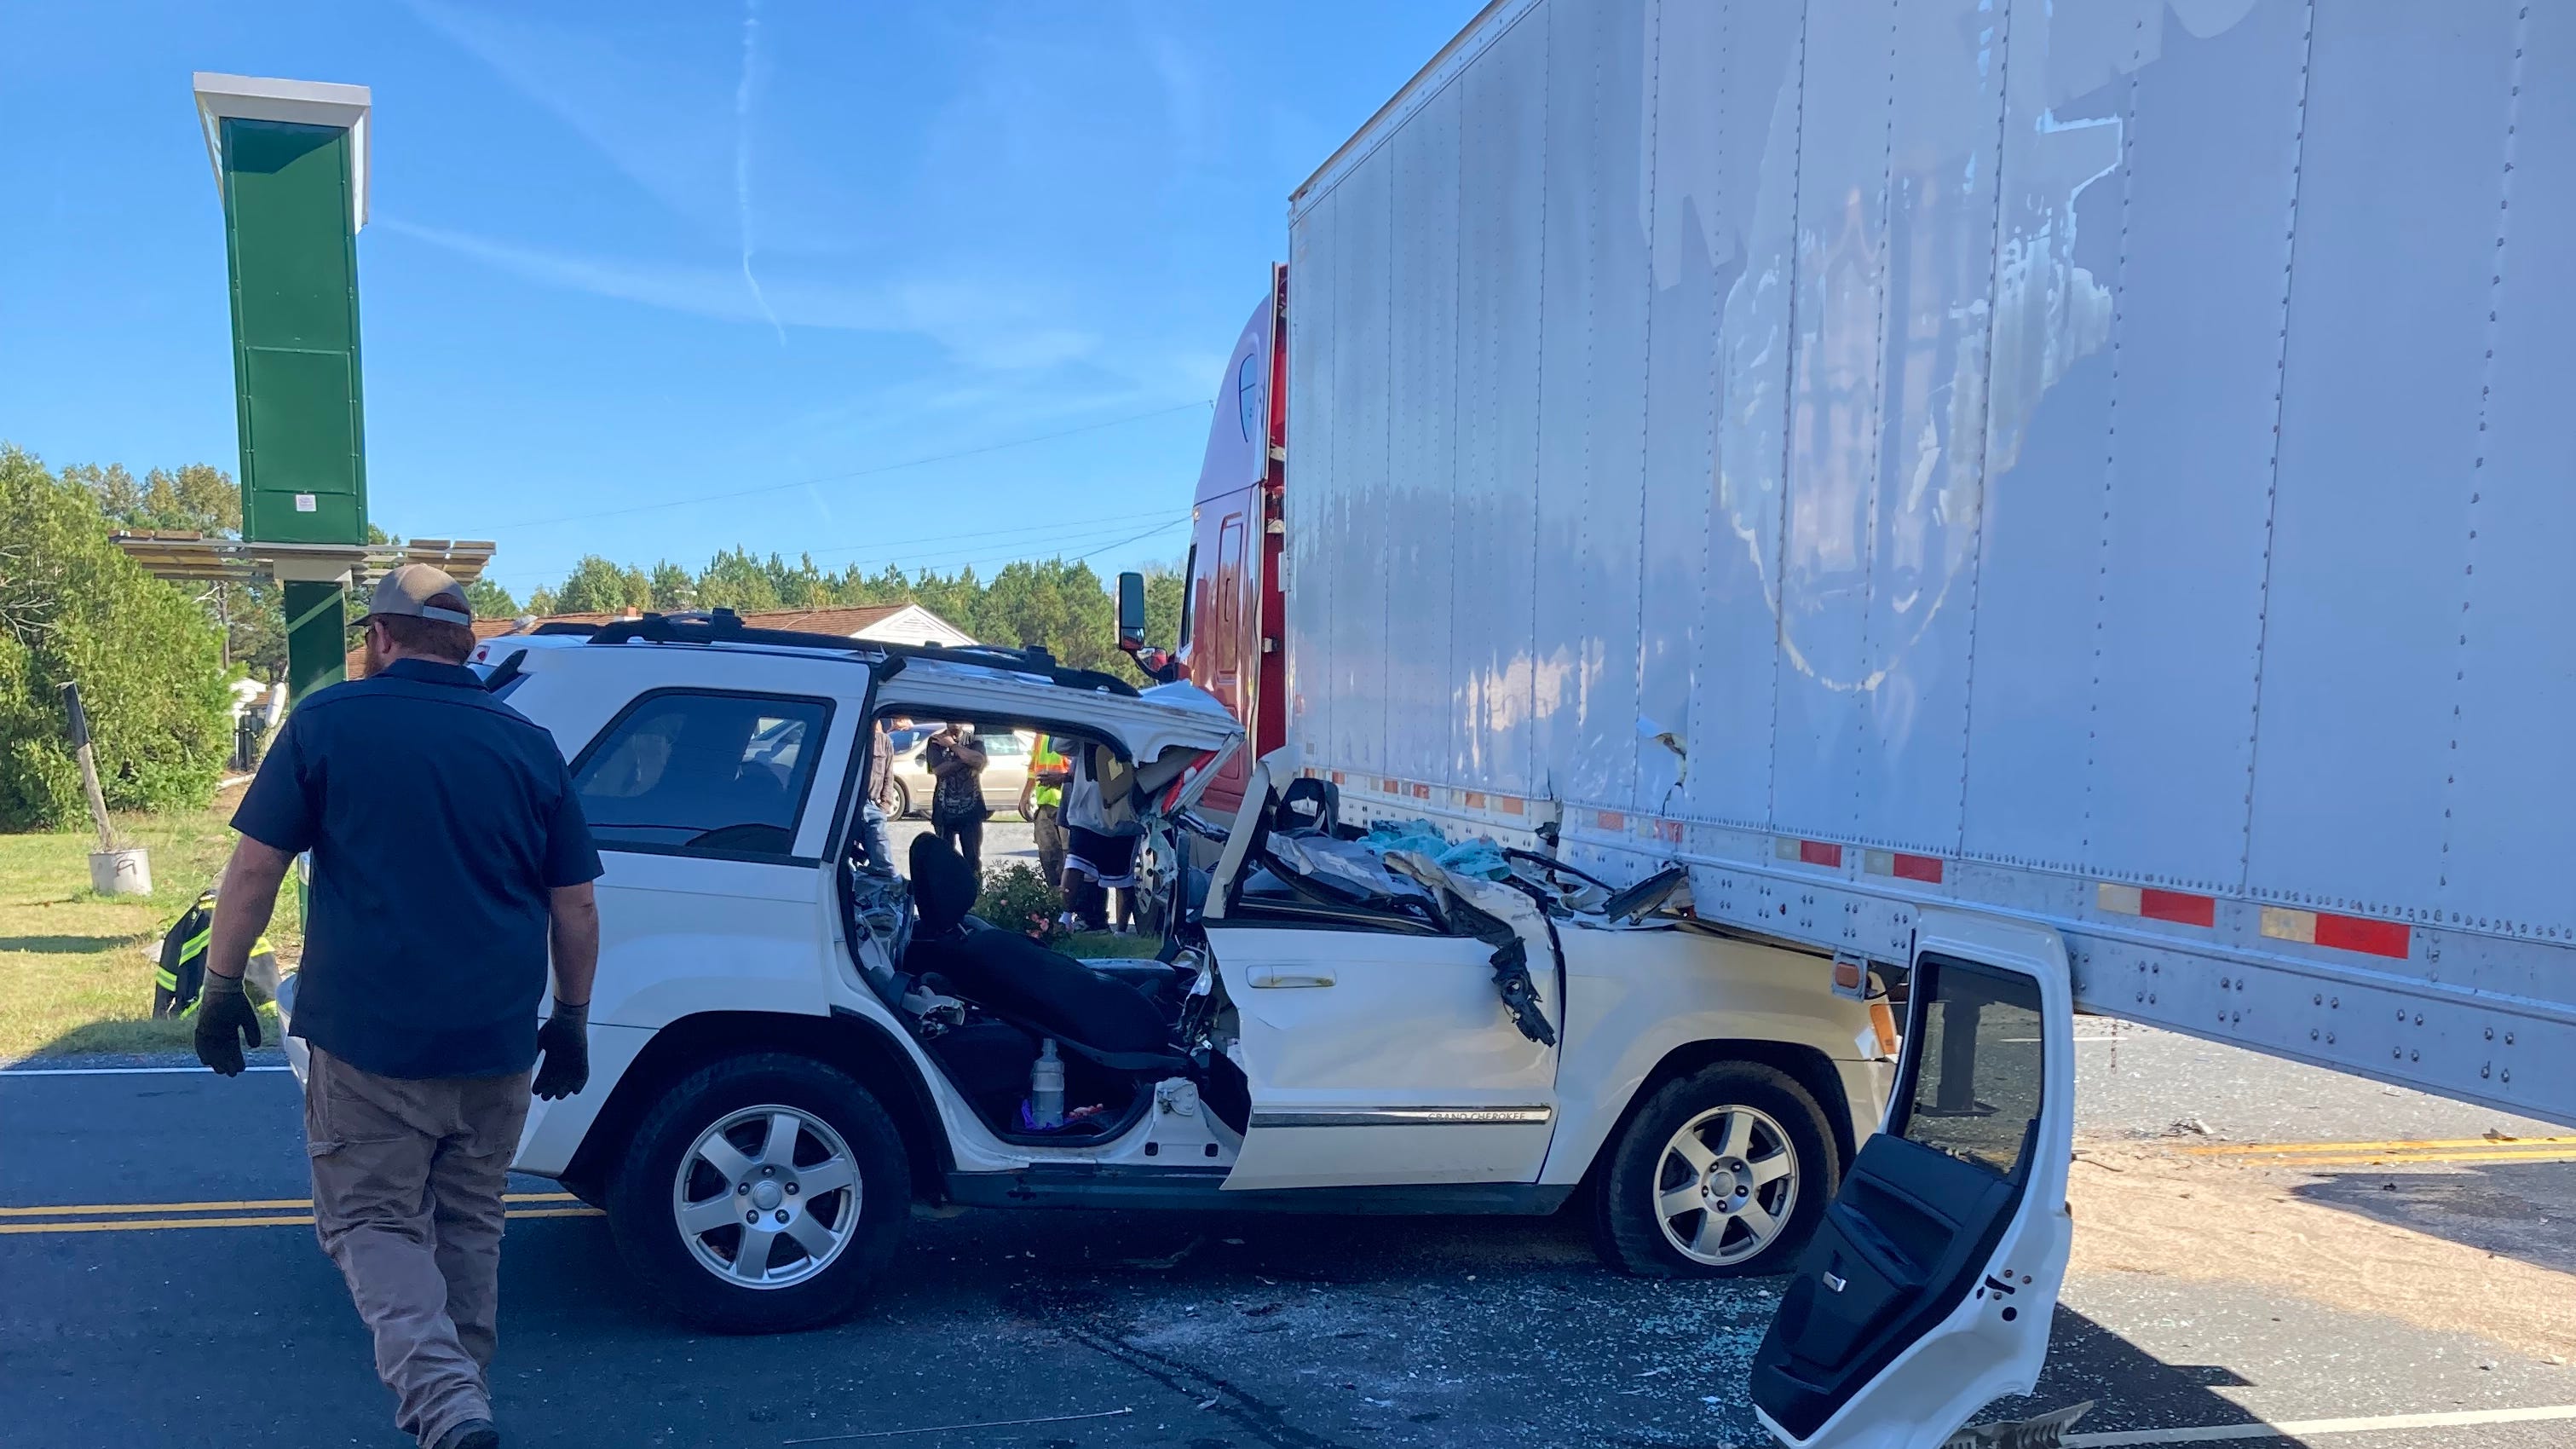  Two injured after Jeep gets lodged under tractor-trailer on Chincoteague Road 